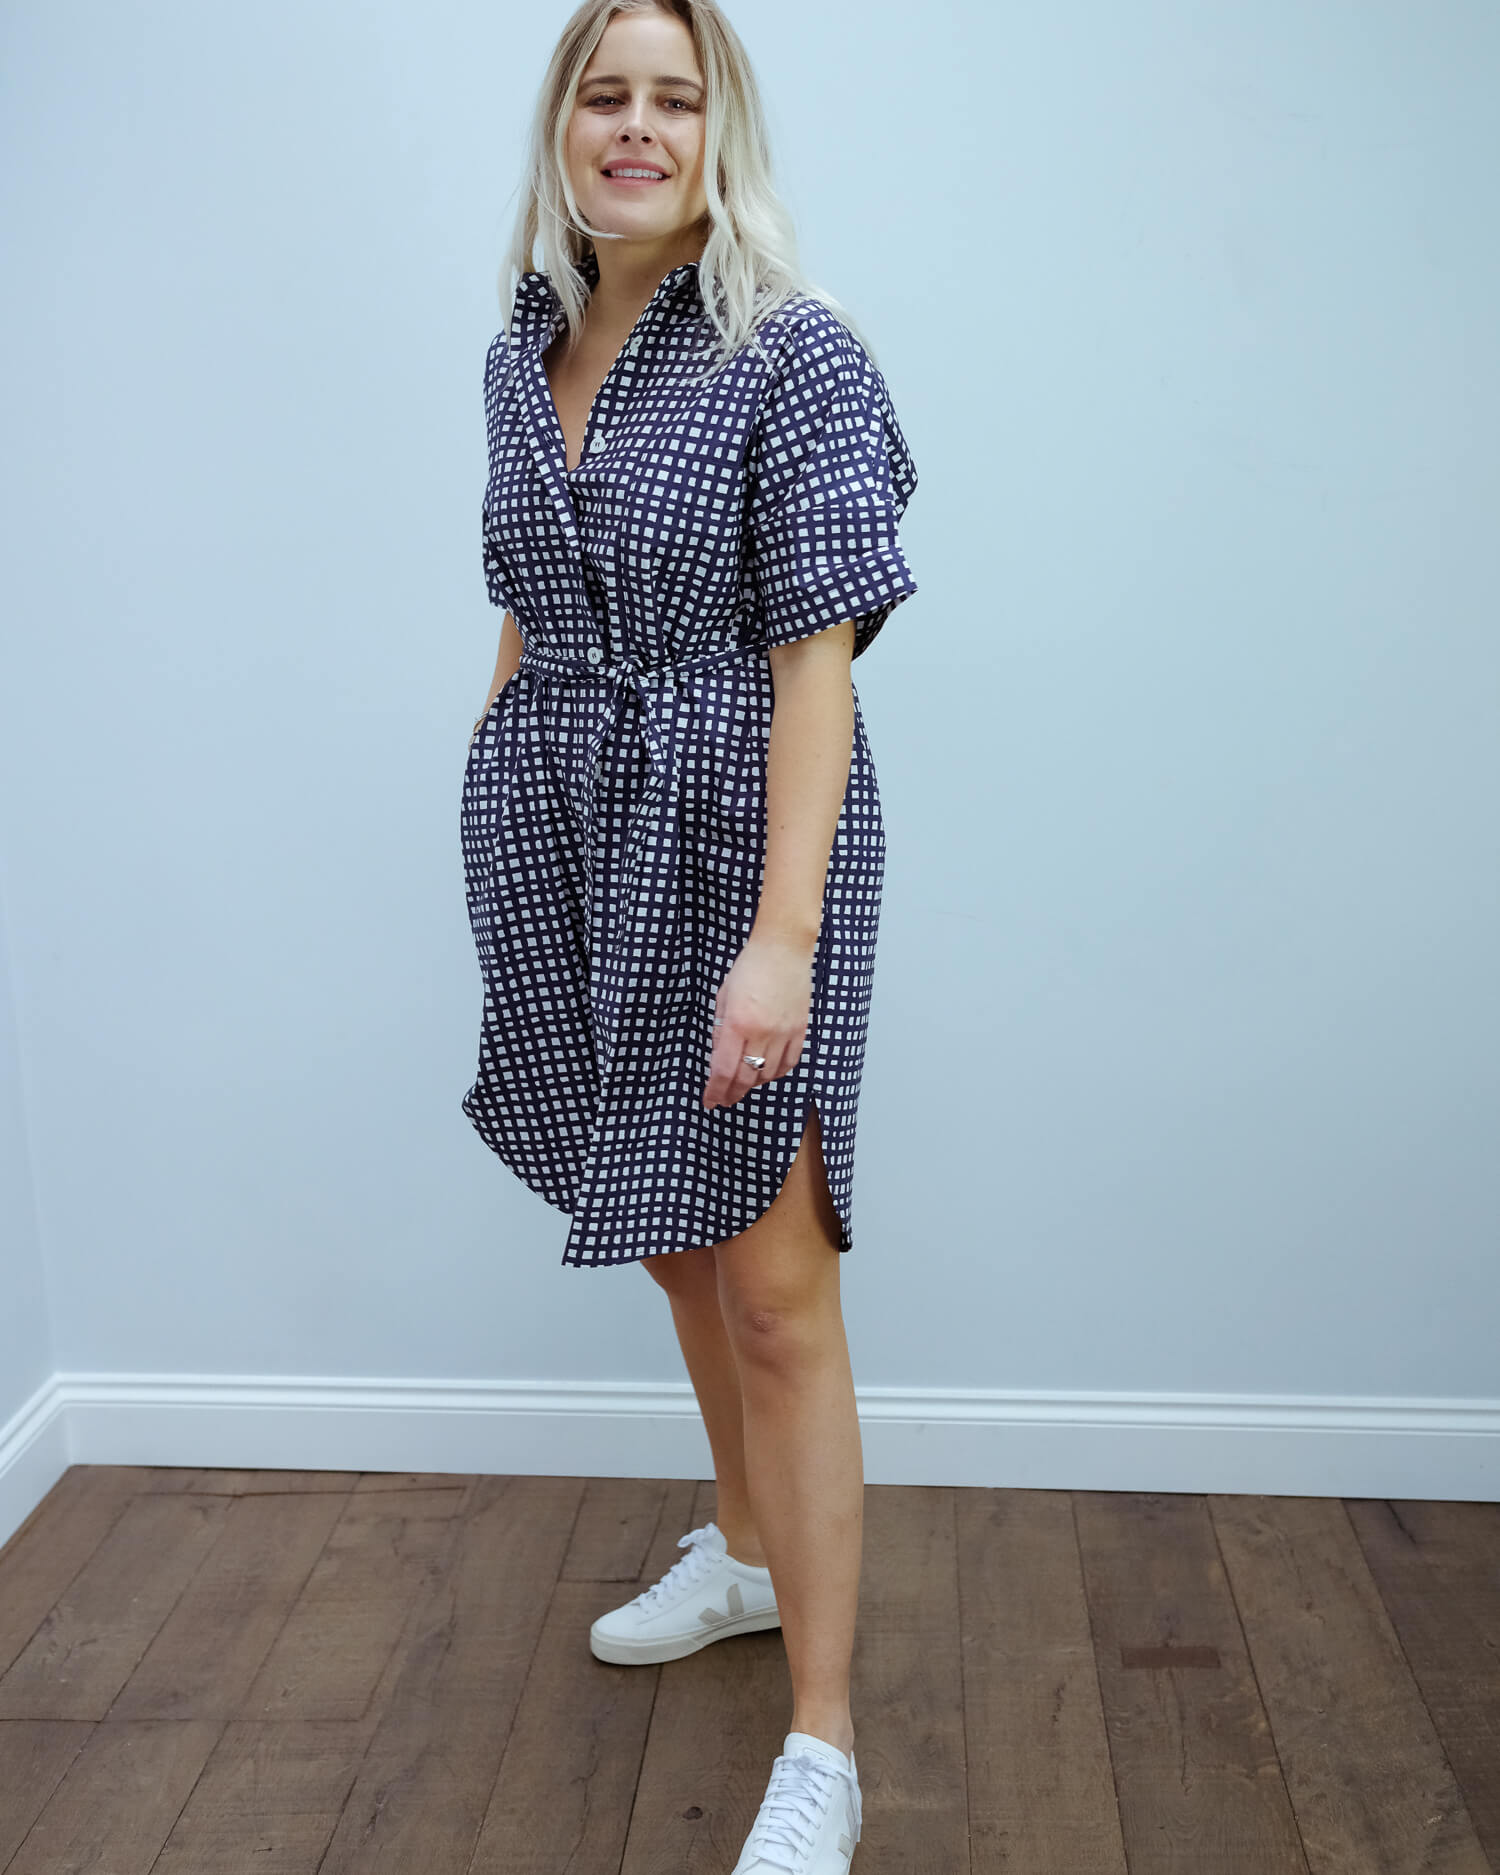 LOR Ni checked dress in navy